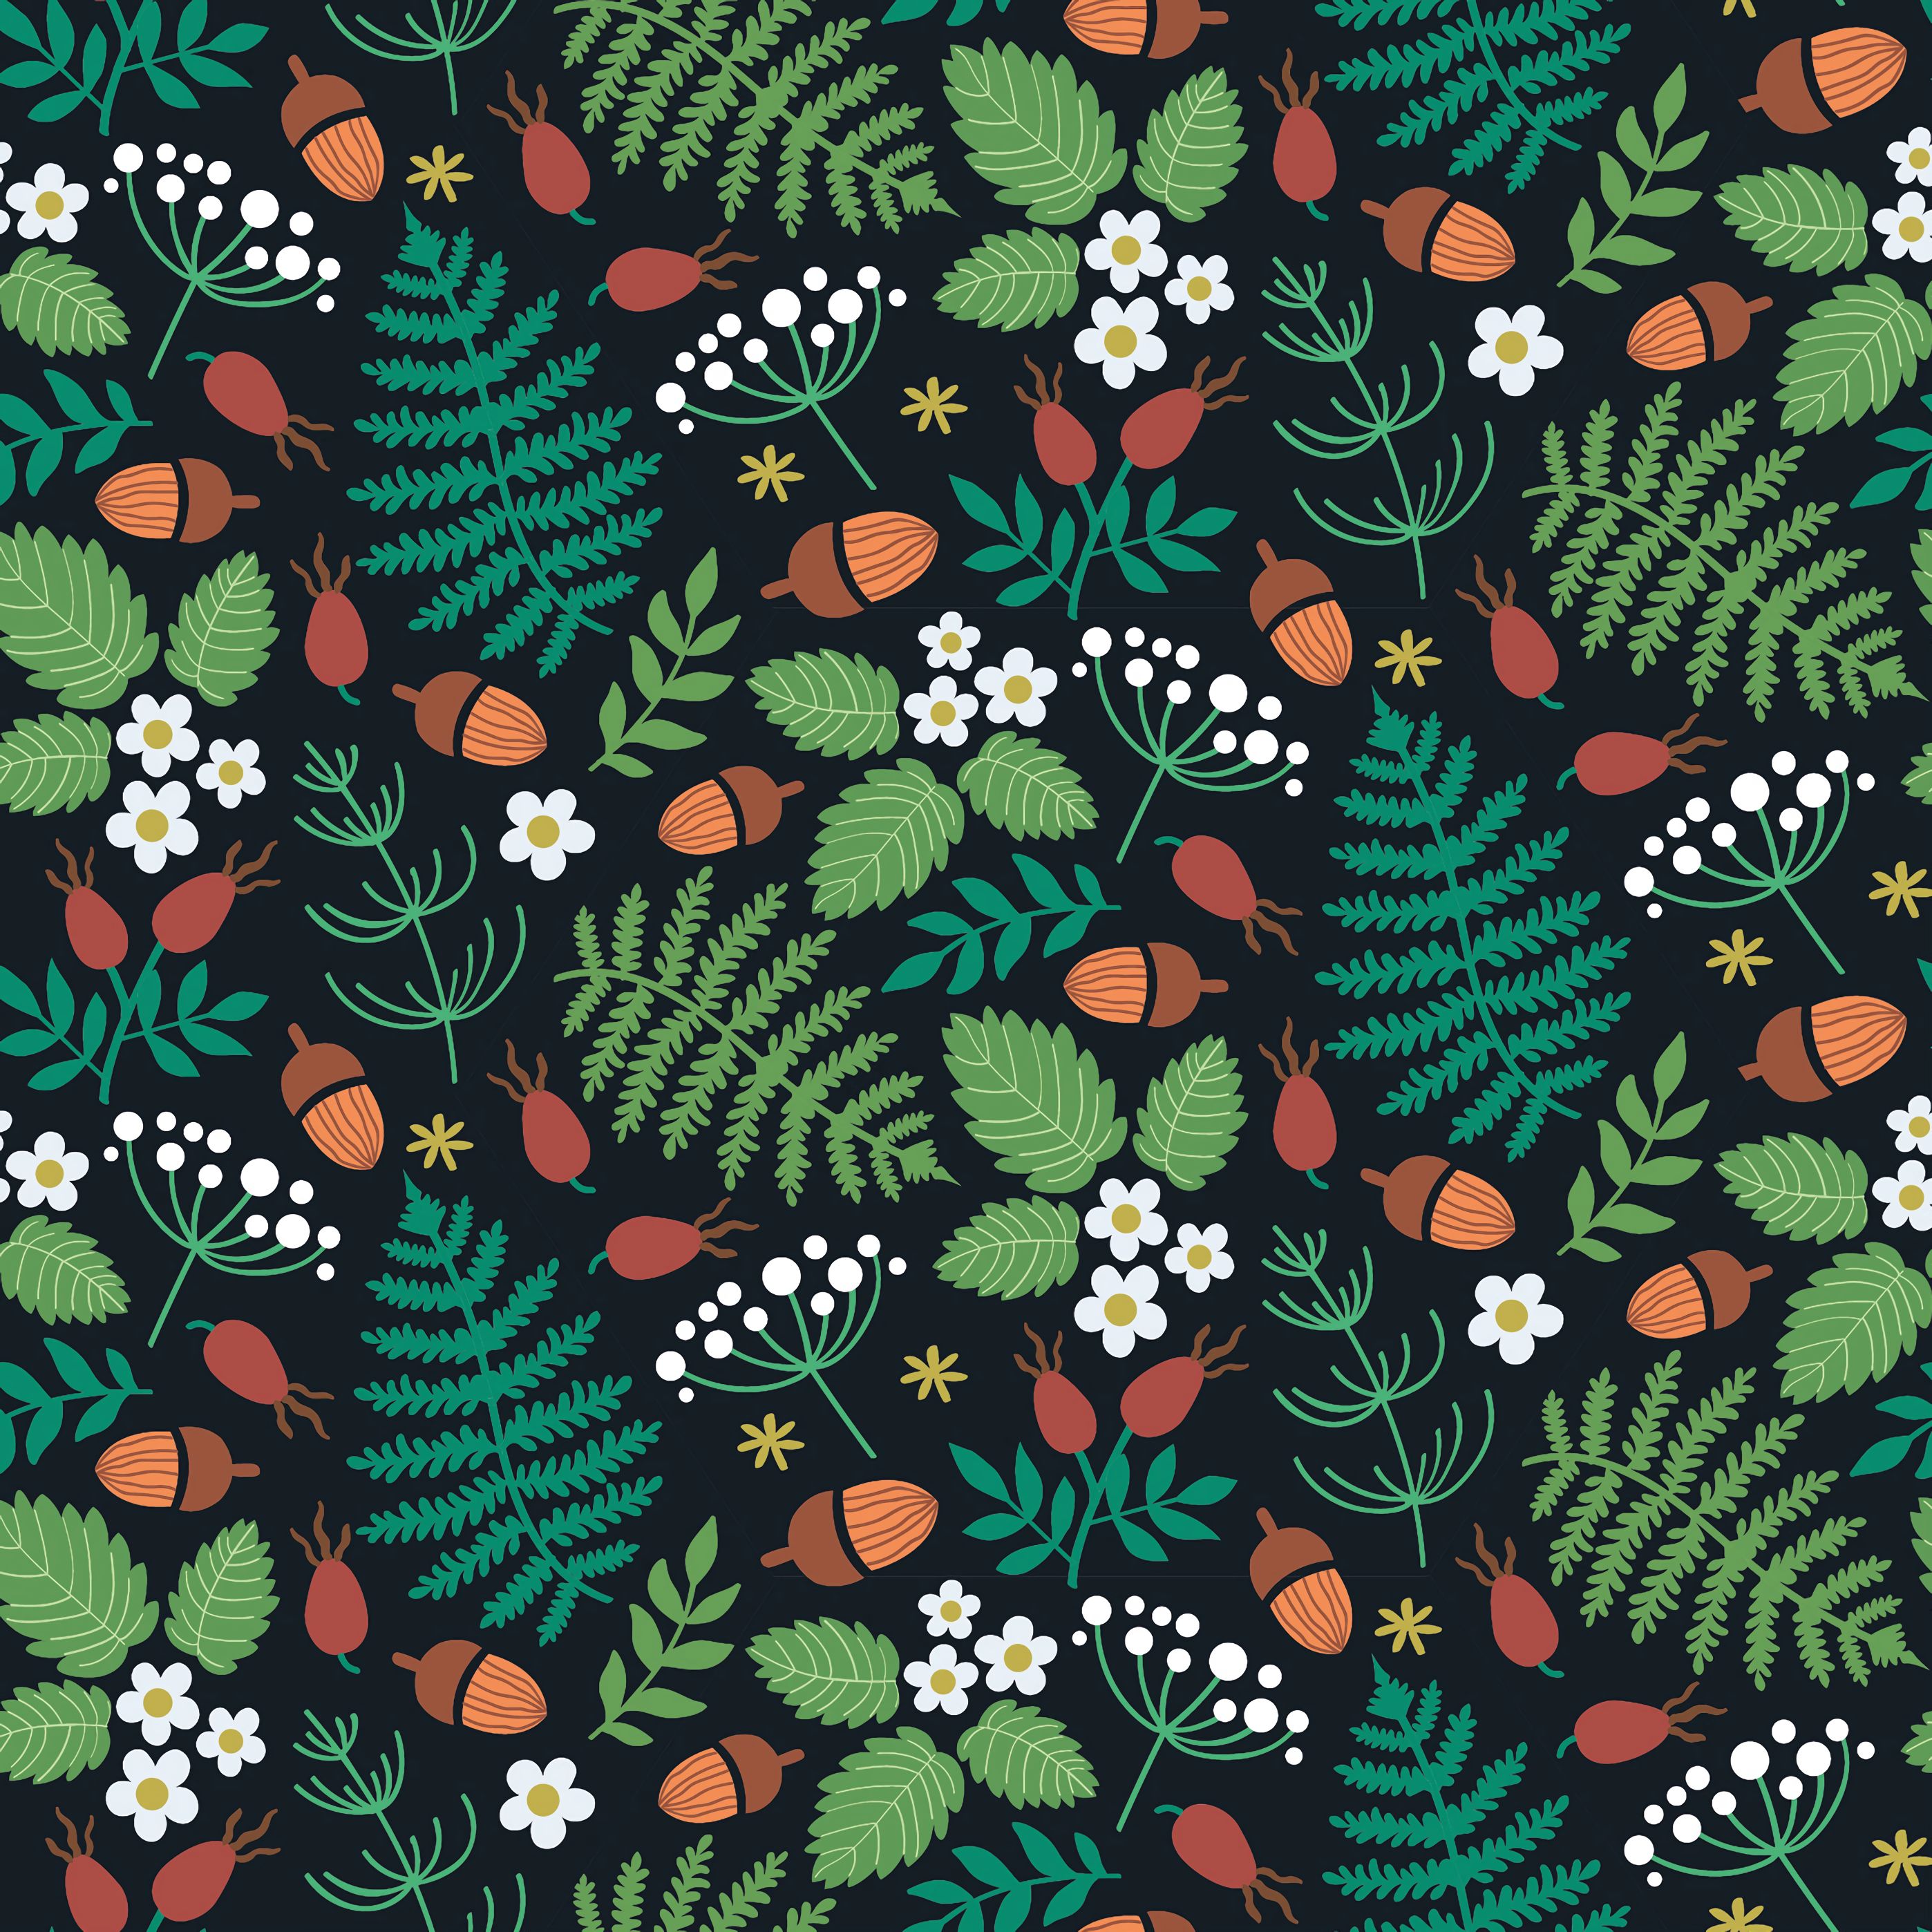 texture, textures, forest, pattern, leaves, strawberry, berries, acorns, wild strawberries, motive phone wallpaper